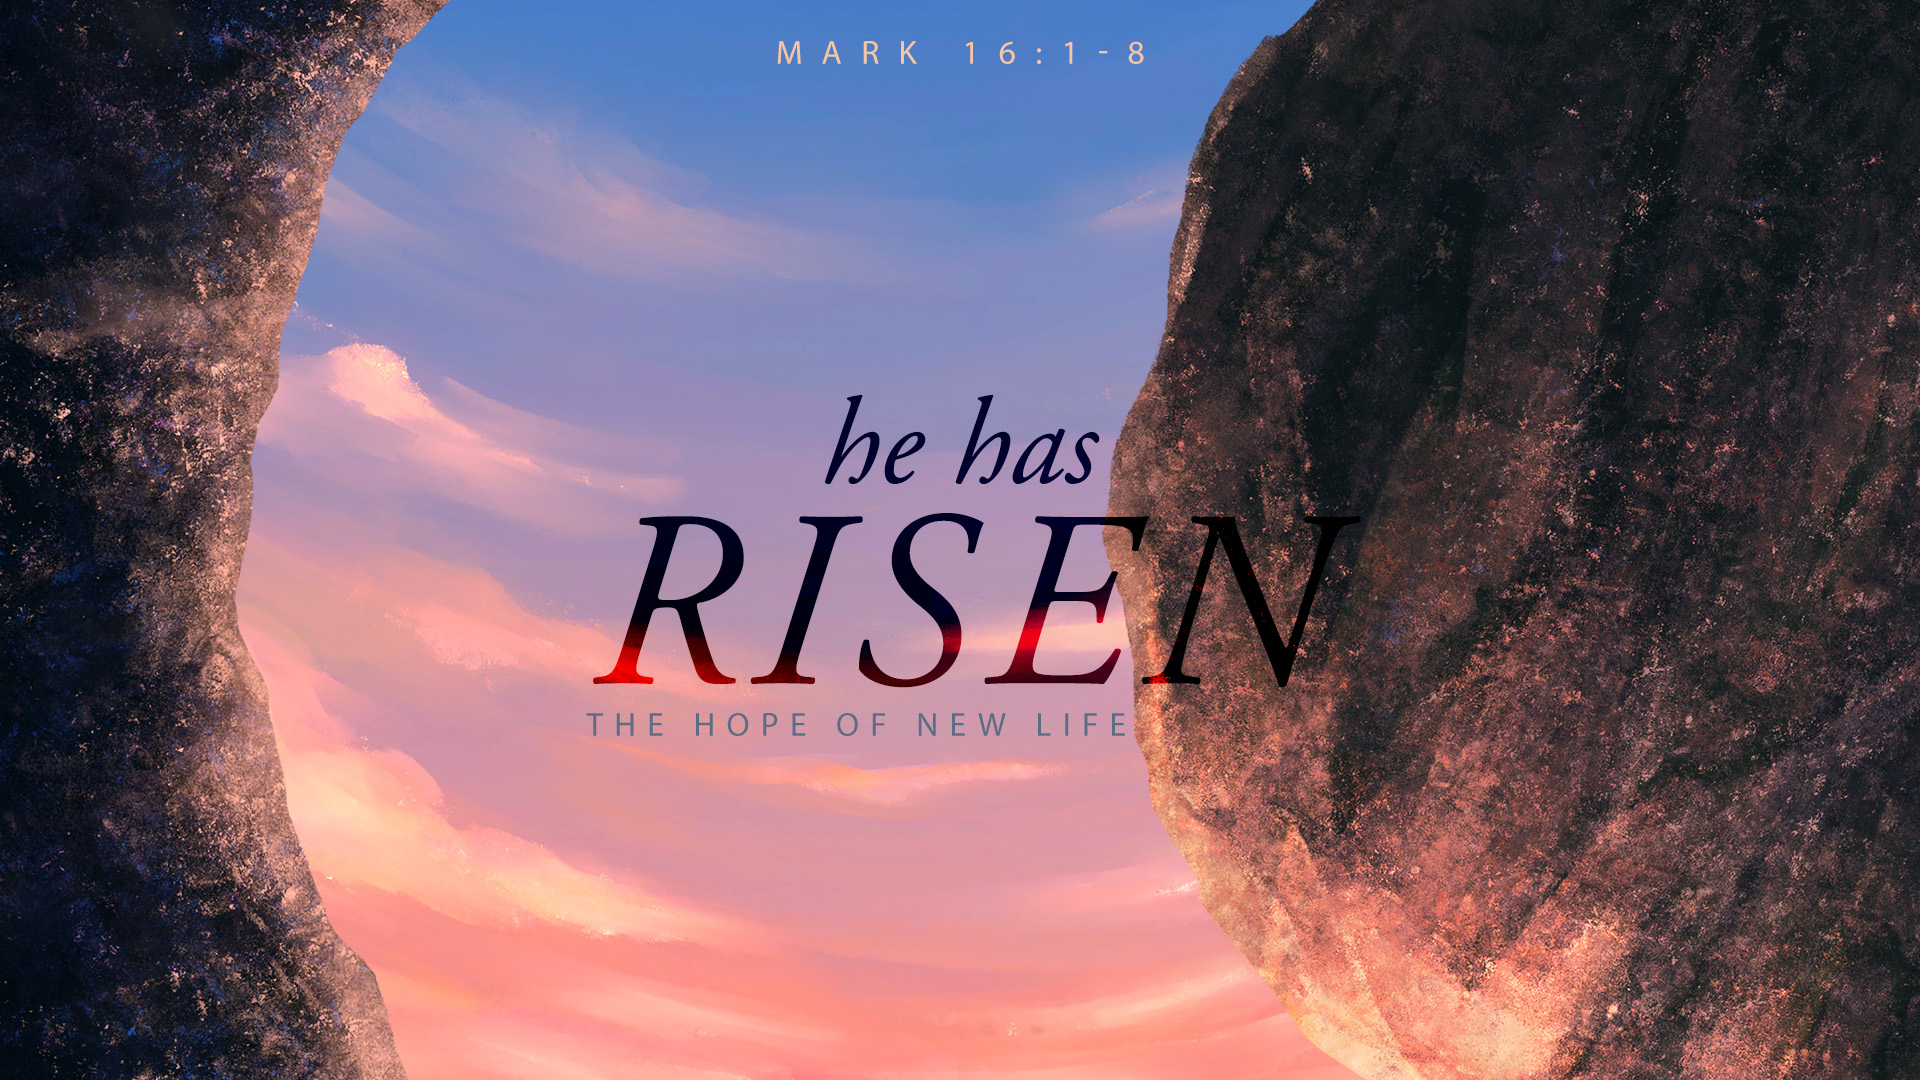 He Has Risen: The Hope of New Life Image